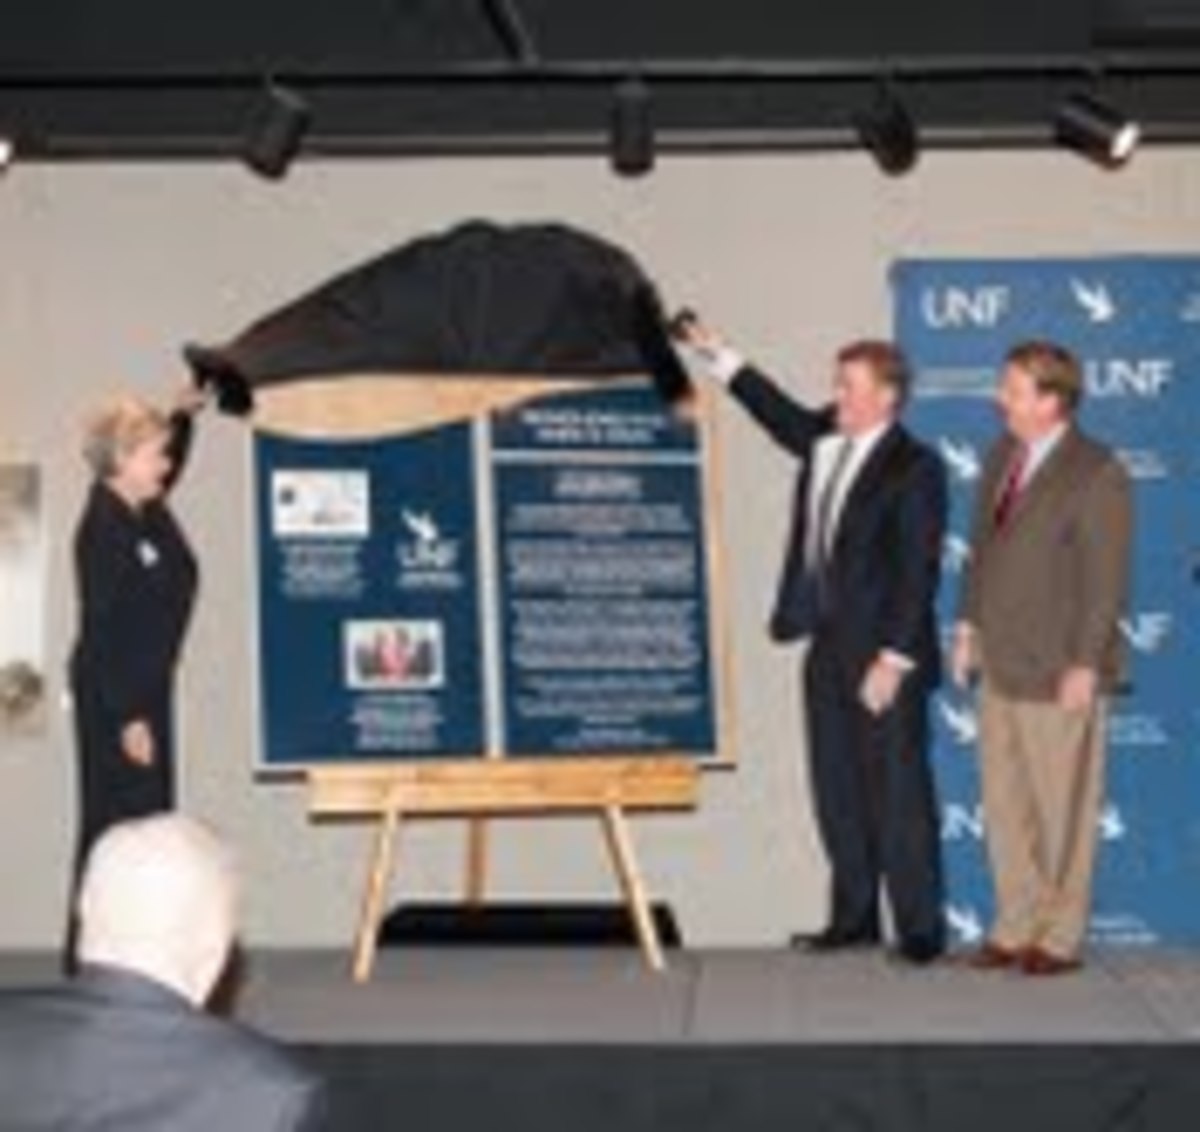 The new plaque honoring the Skinner Family is revealed. Photo by Jennifer Grissom of UNF Public Relations